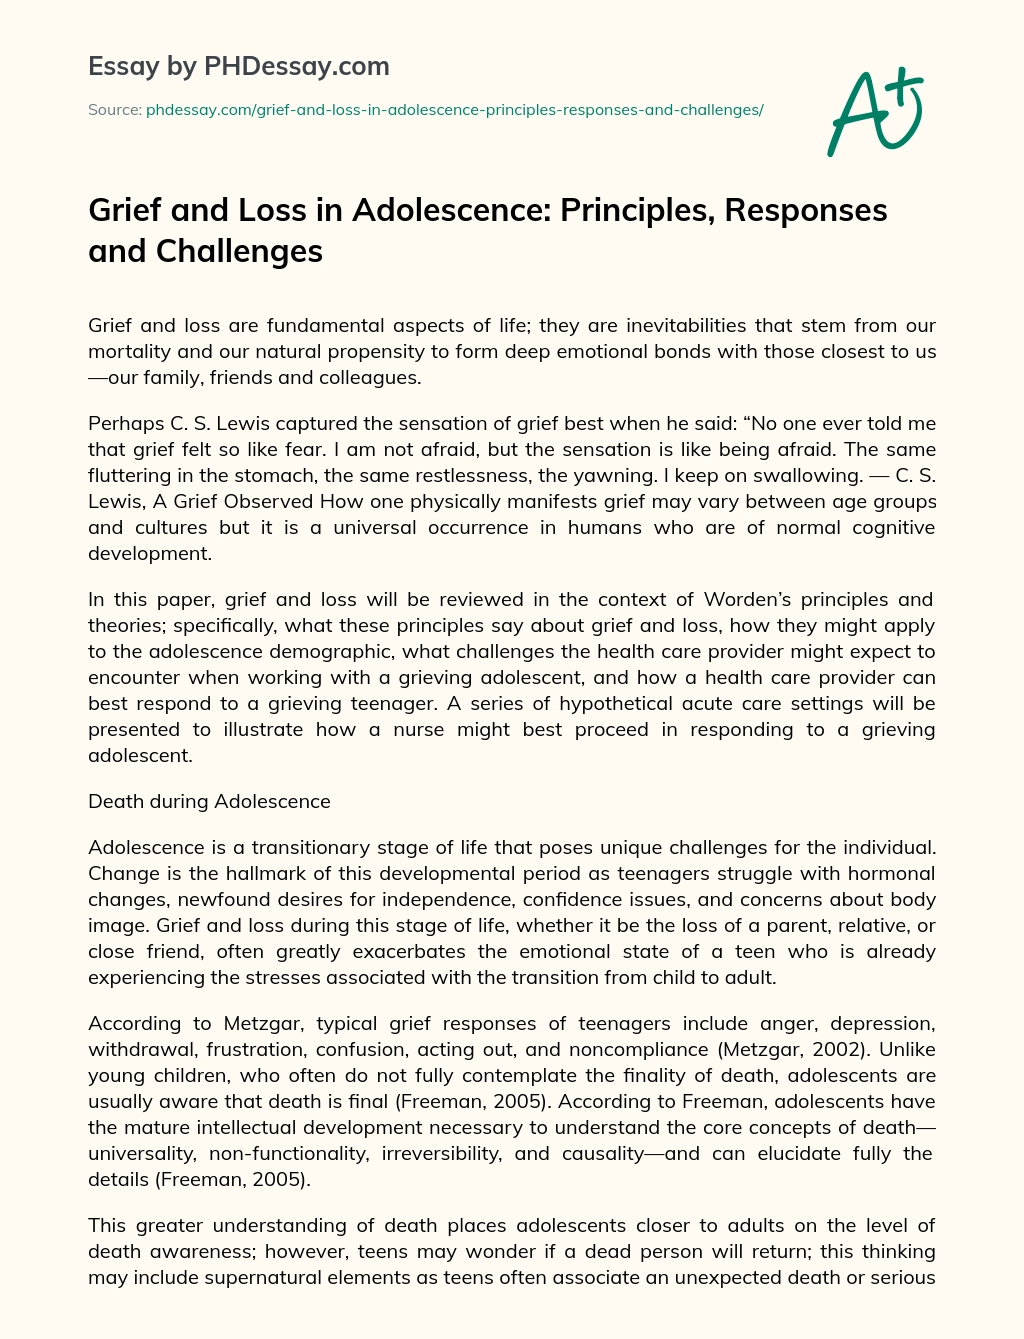 Grief and Loss in Adolescence: Principles, Responses and Challenges essay